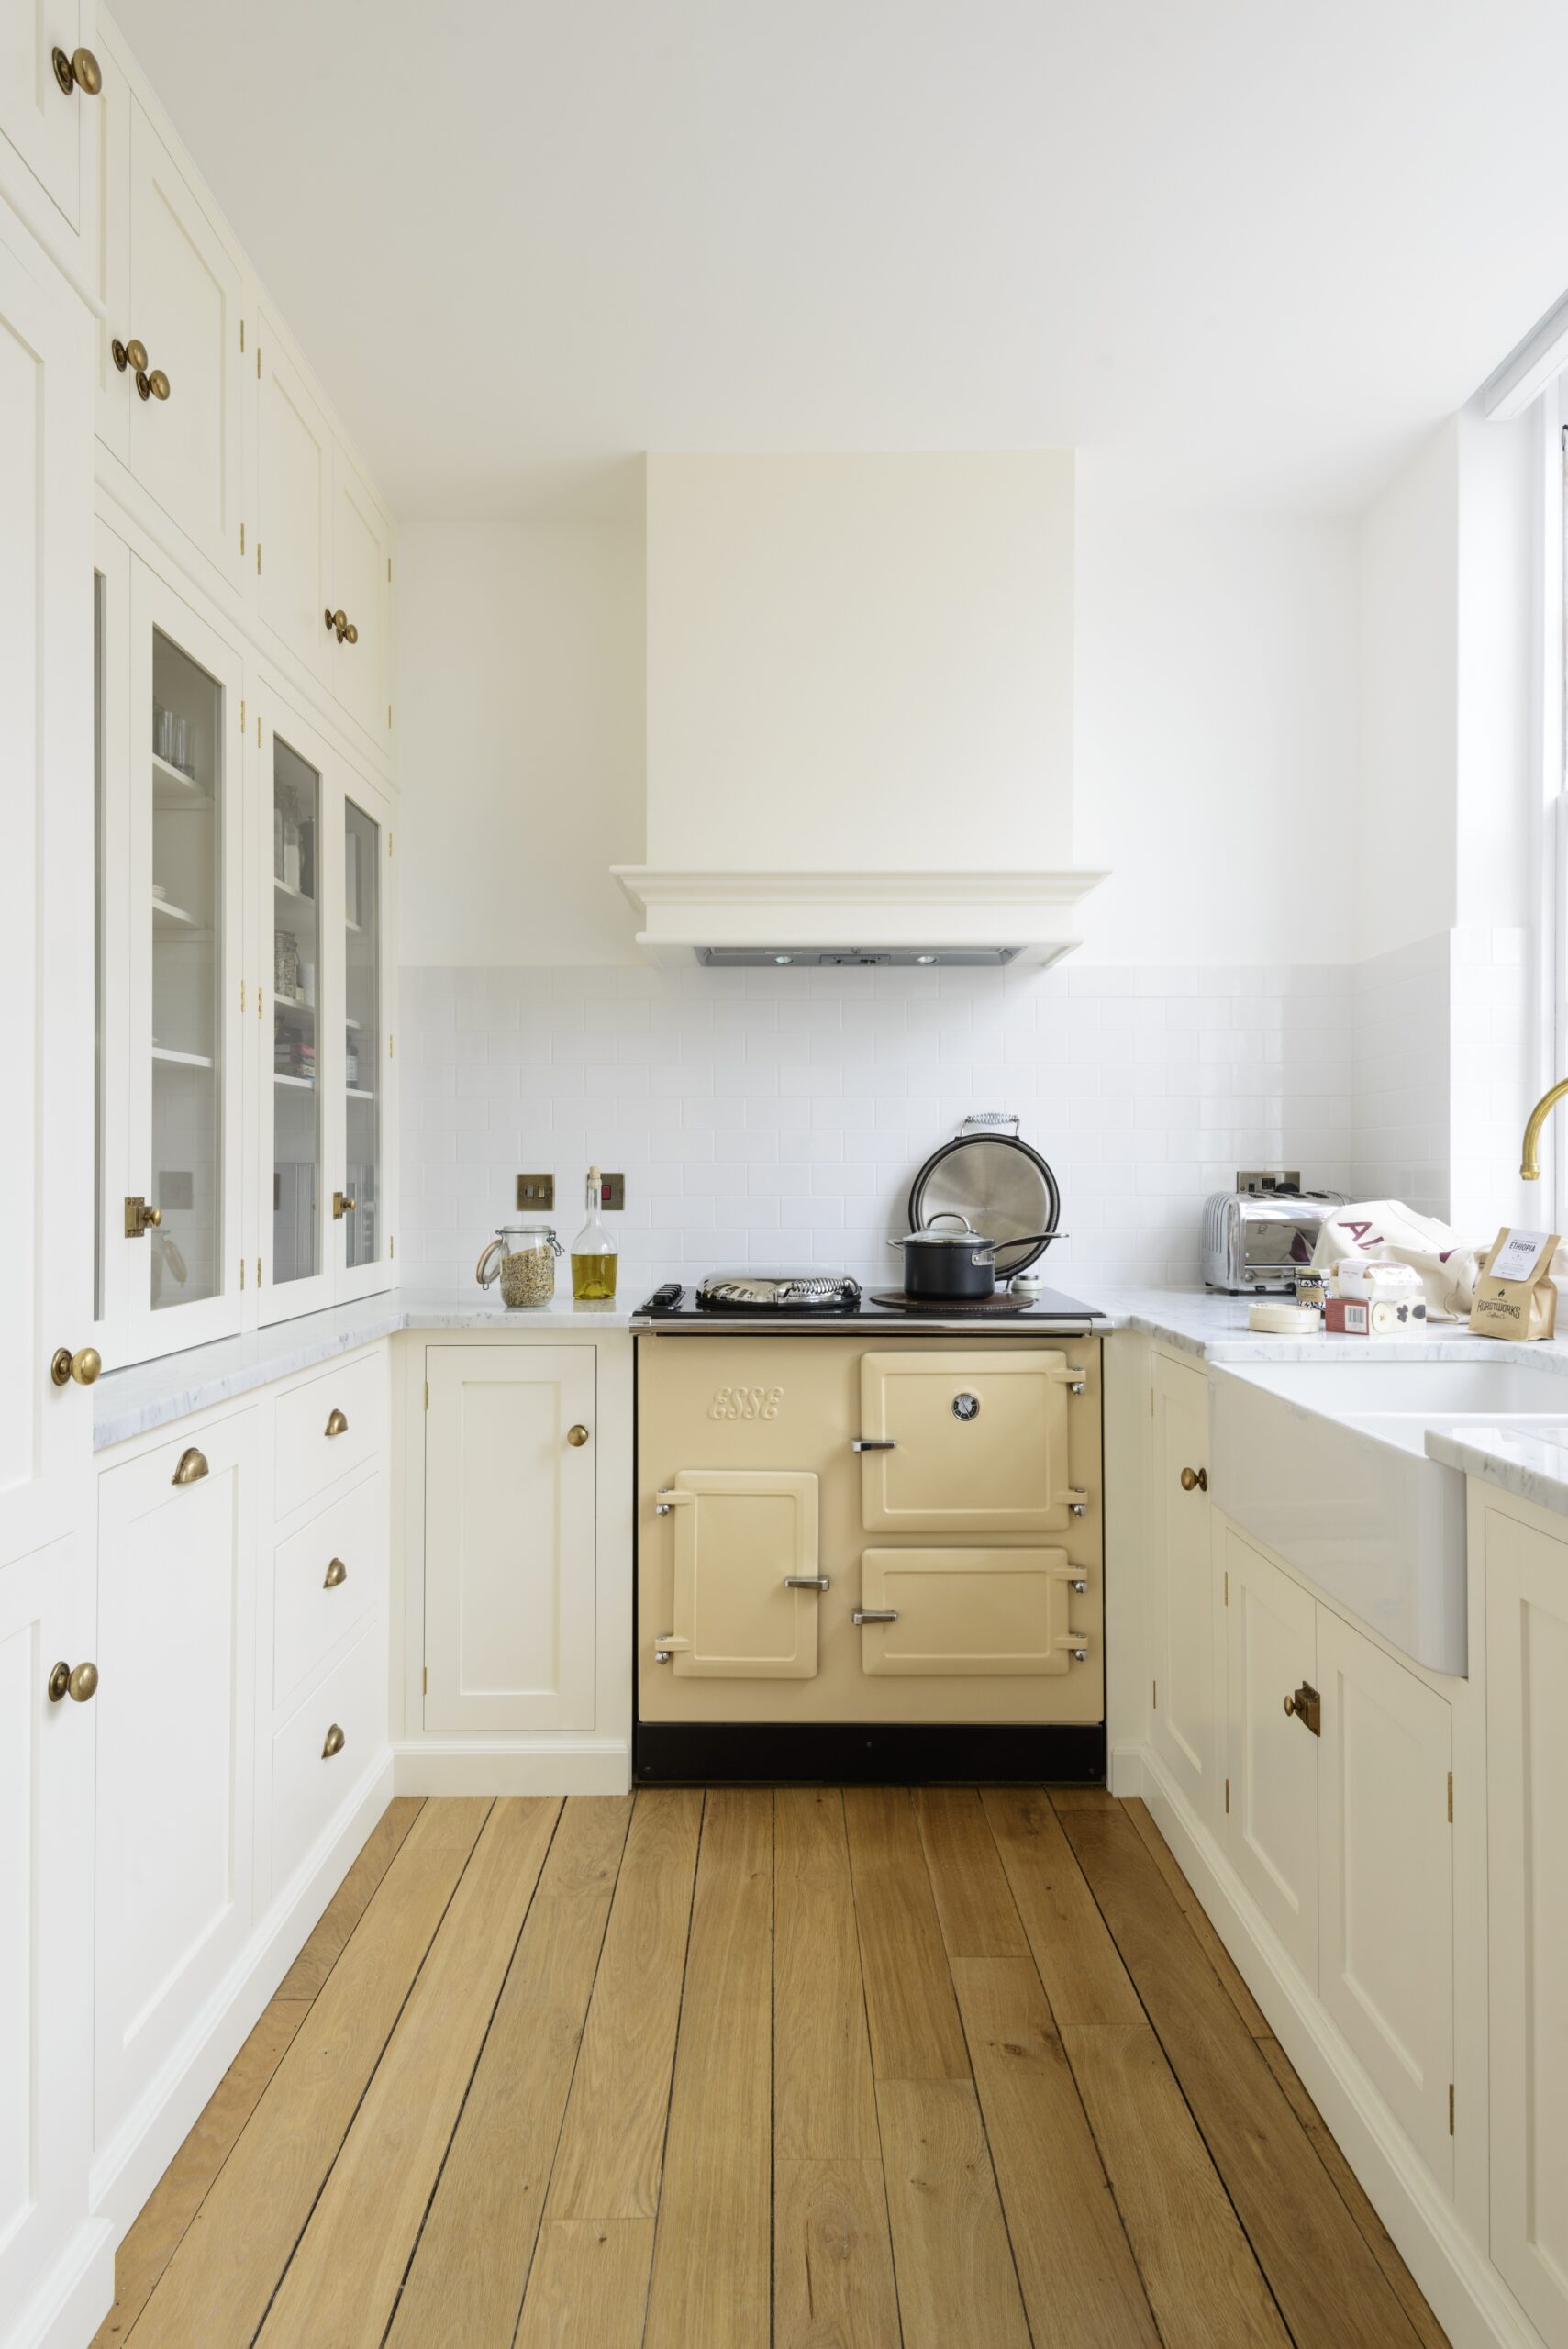 Small kitchen design – 3 tips and ideas for a perfect kitchen  - how do you brighten a small kitchen?